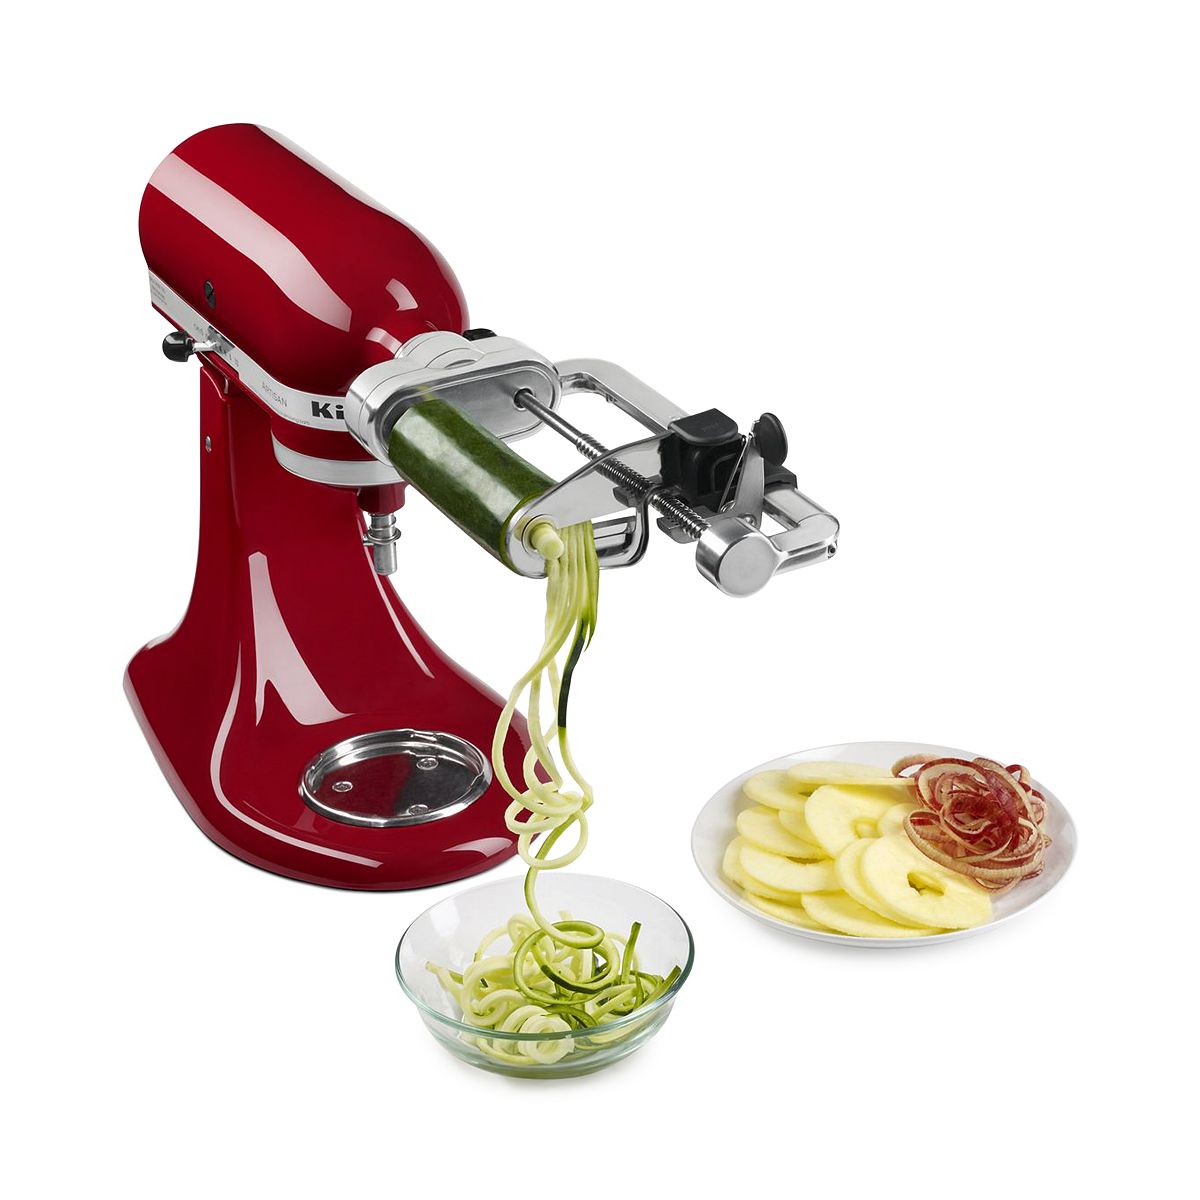 Photo 1 of 5-Blade Spiralizer with Peel, Core and Slice Attachment #KSM1APC